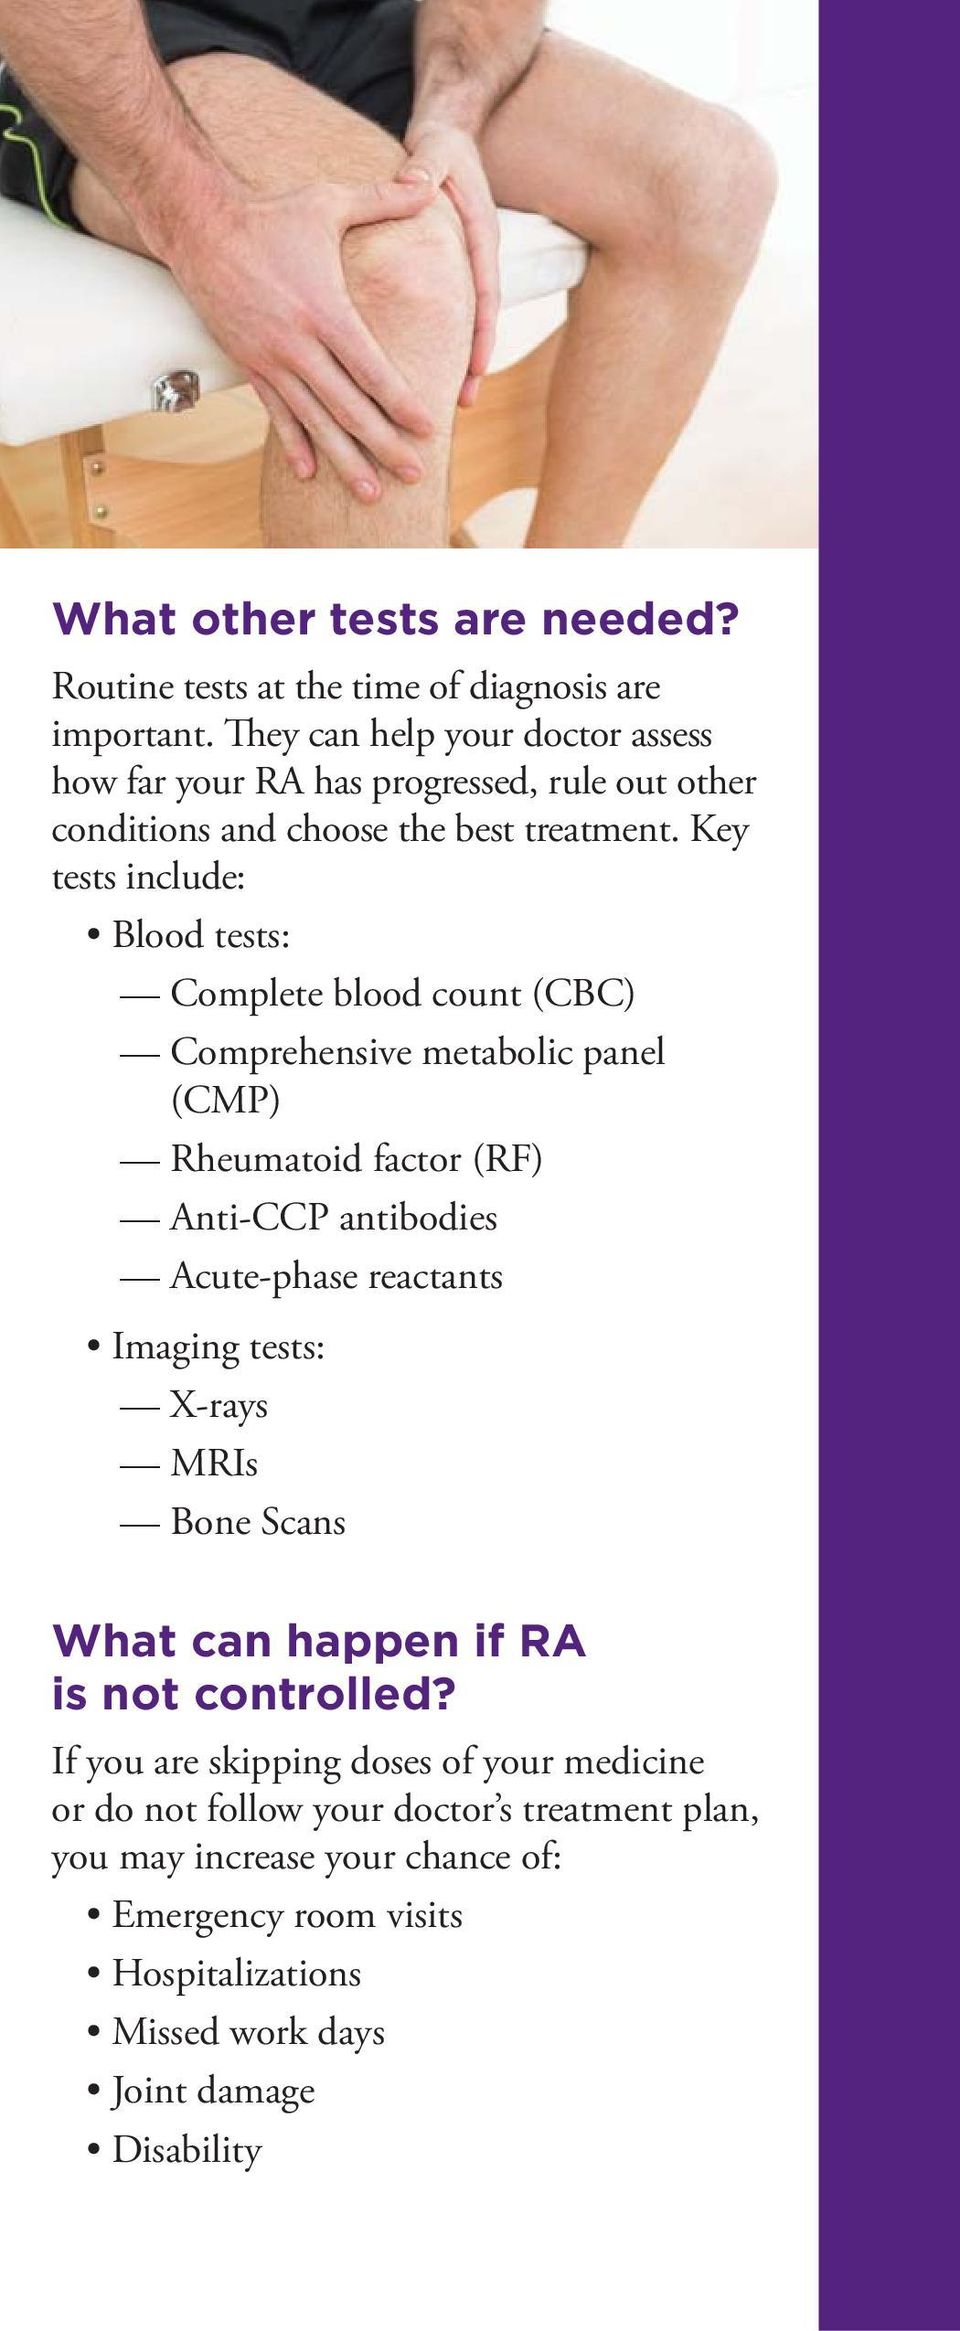 Key tests include: Blood tests: Complete blood count (CBC) Comprehensive metabolic panel (CMP) Rheumatoid factor (RF) Anti-CCP antibodies Acute-phase reactants